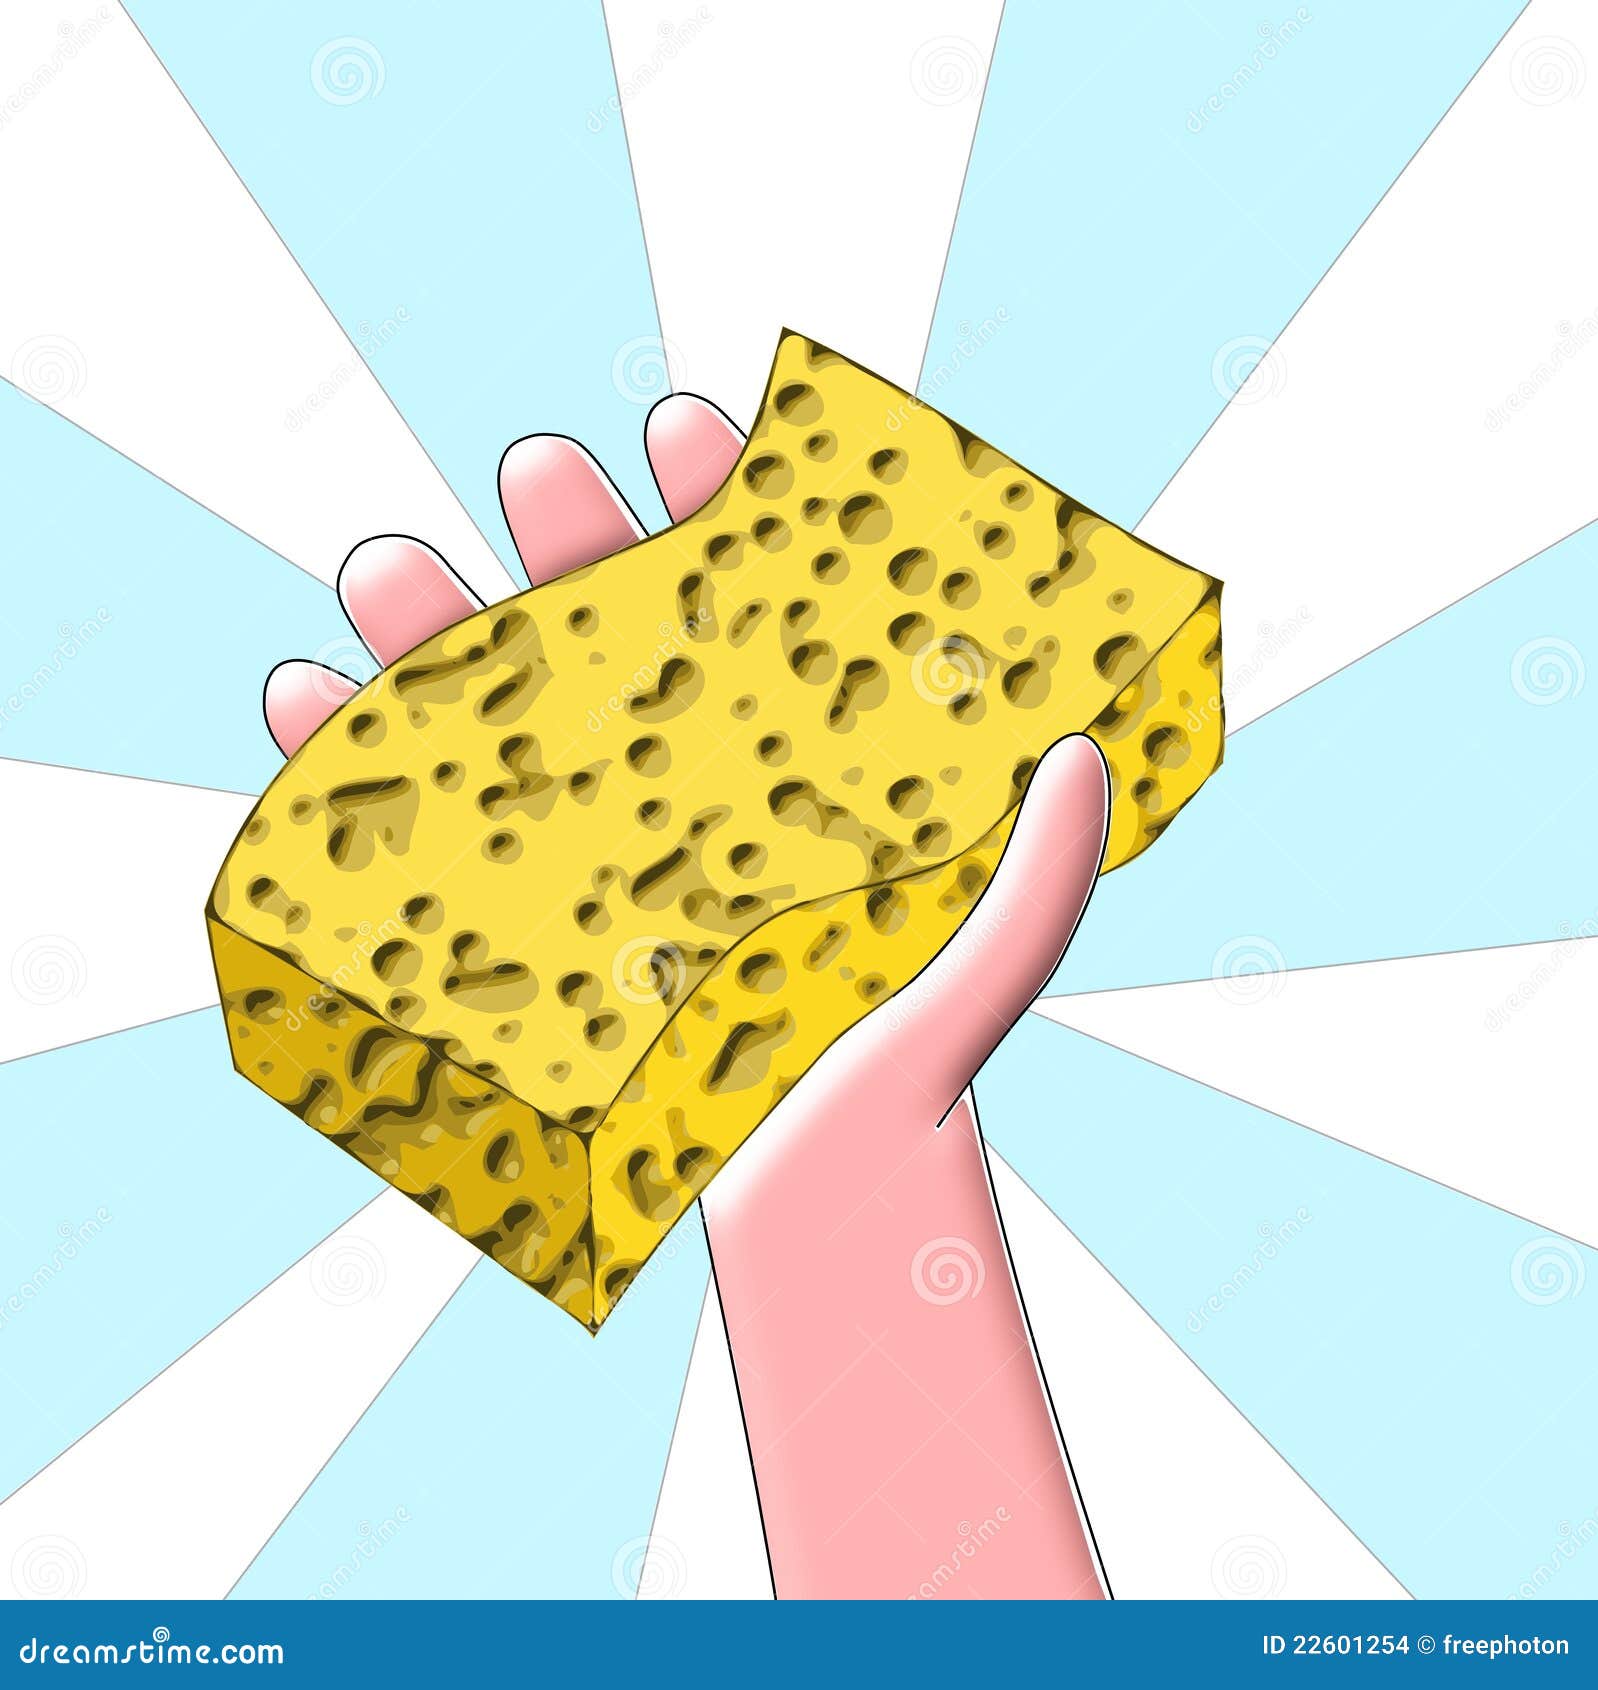 time to clean - hand holding sponge